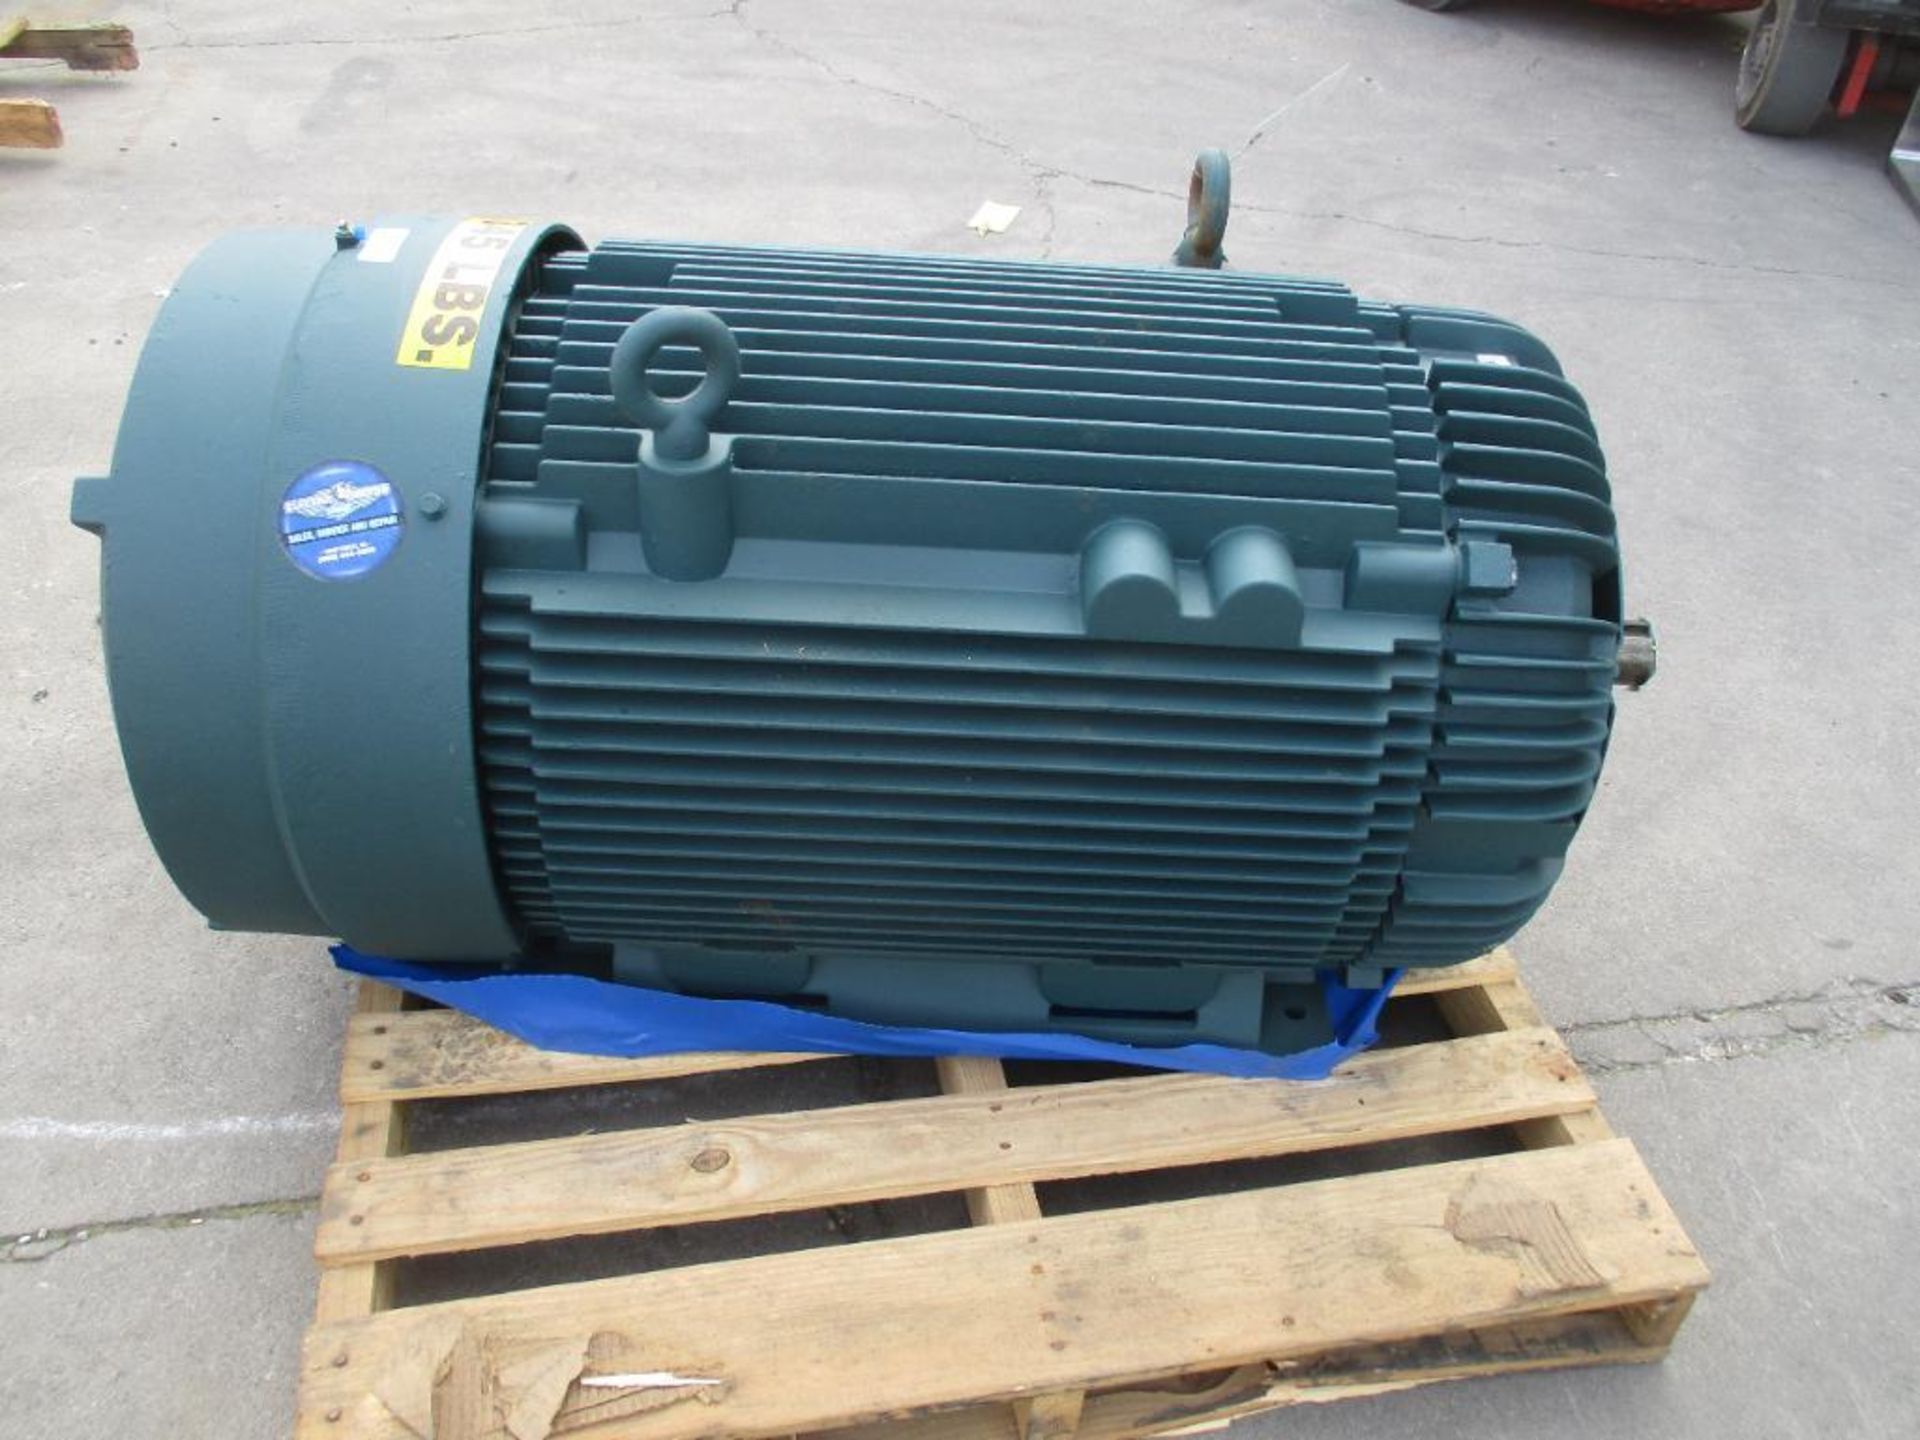 RELIANCE ELECTRIC 3 PHASE 250HP 3570RPM 449TS FRAME A/C MOTOR P/N 841XL 2294# LBS (THIS LOT IS FOB K